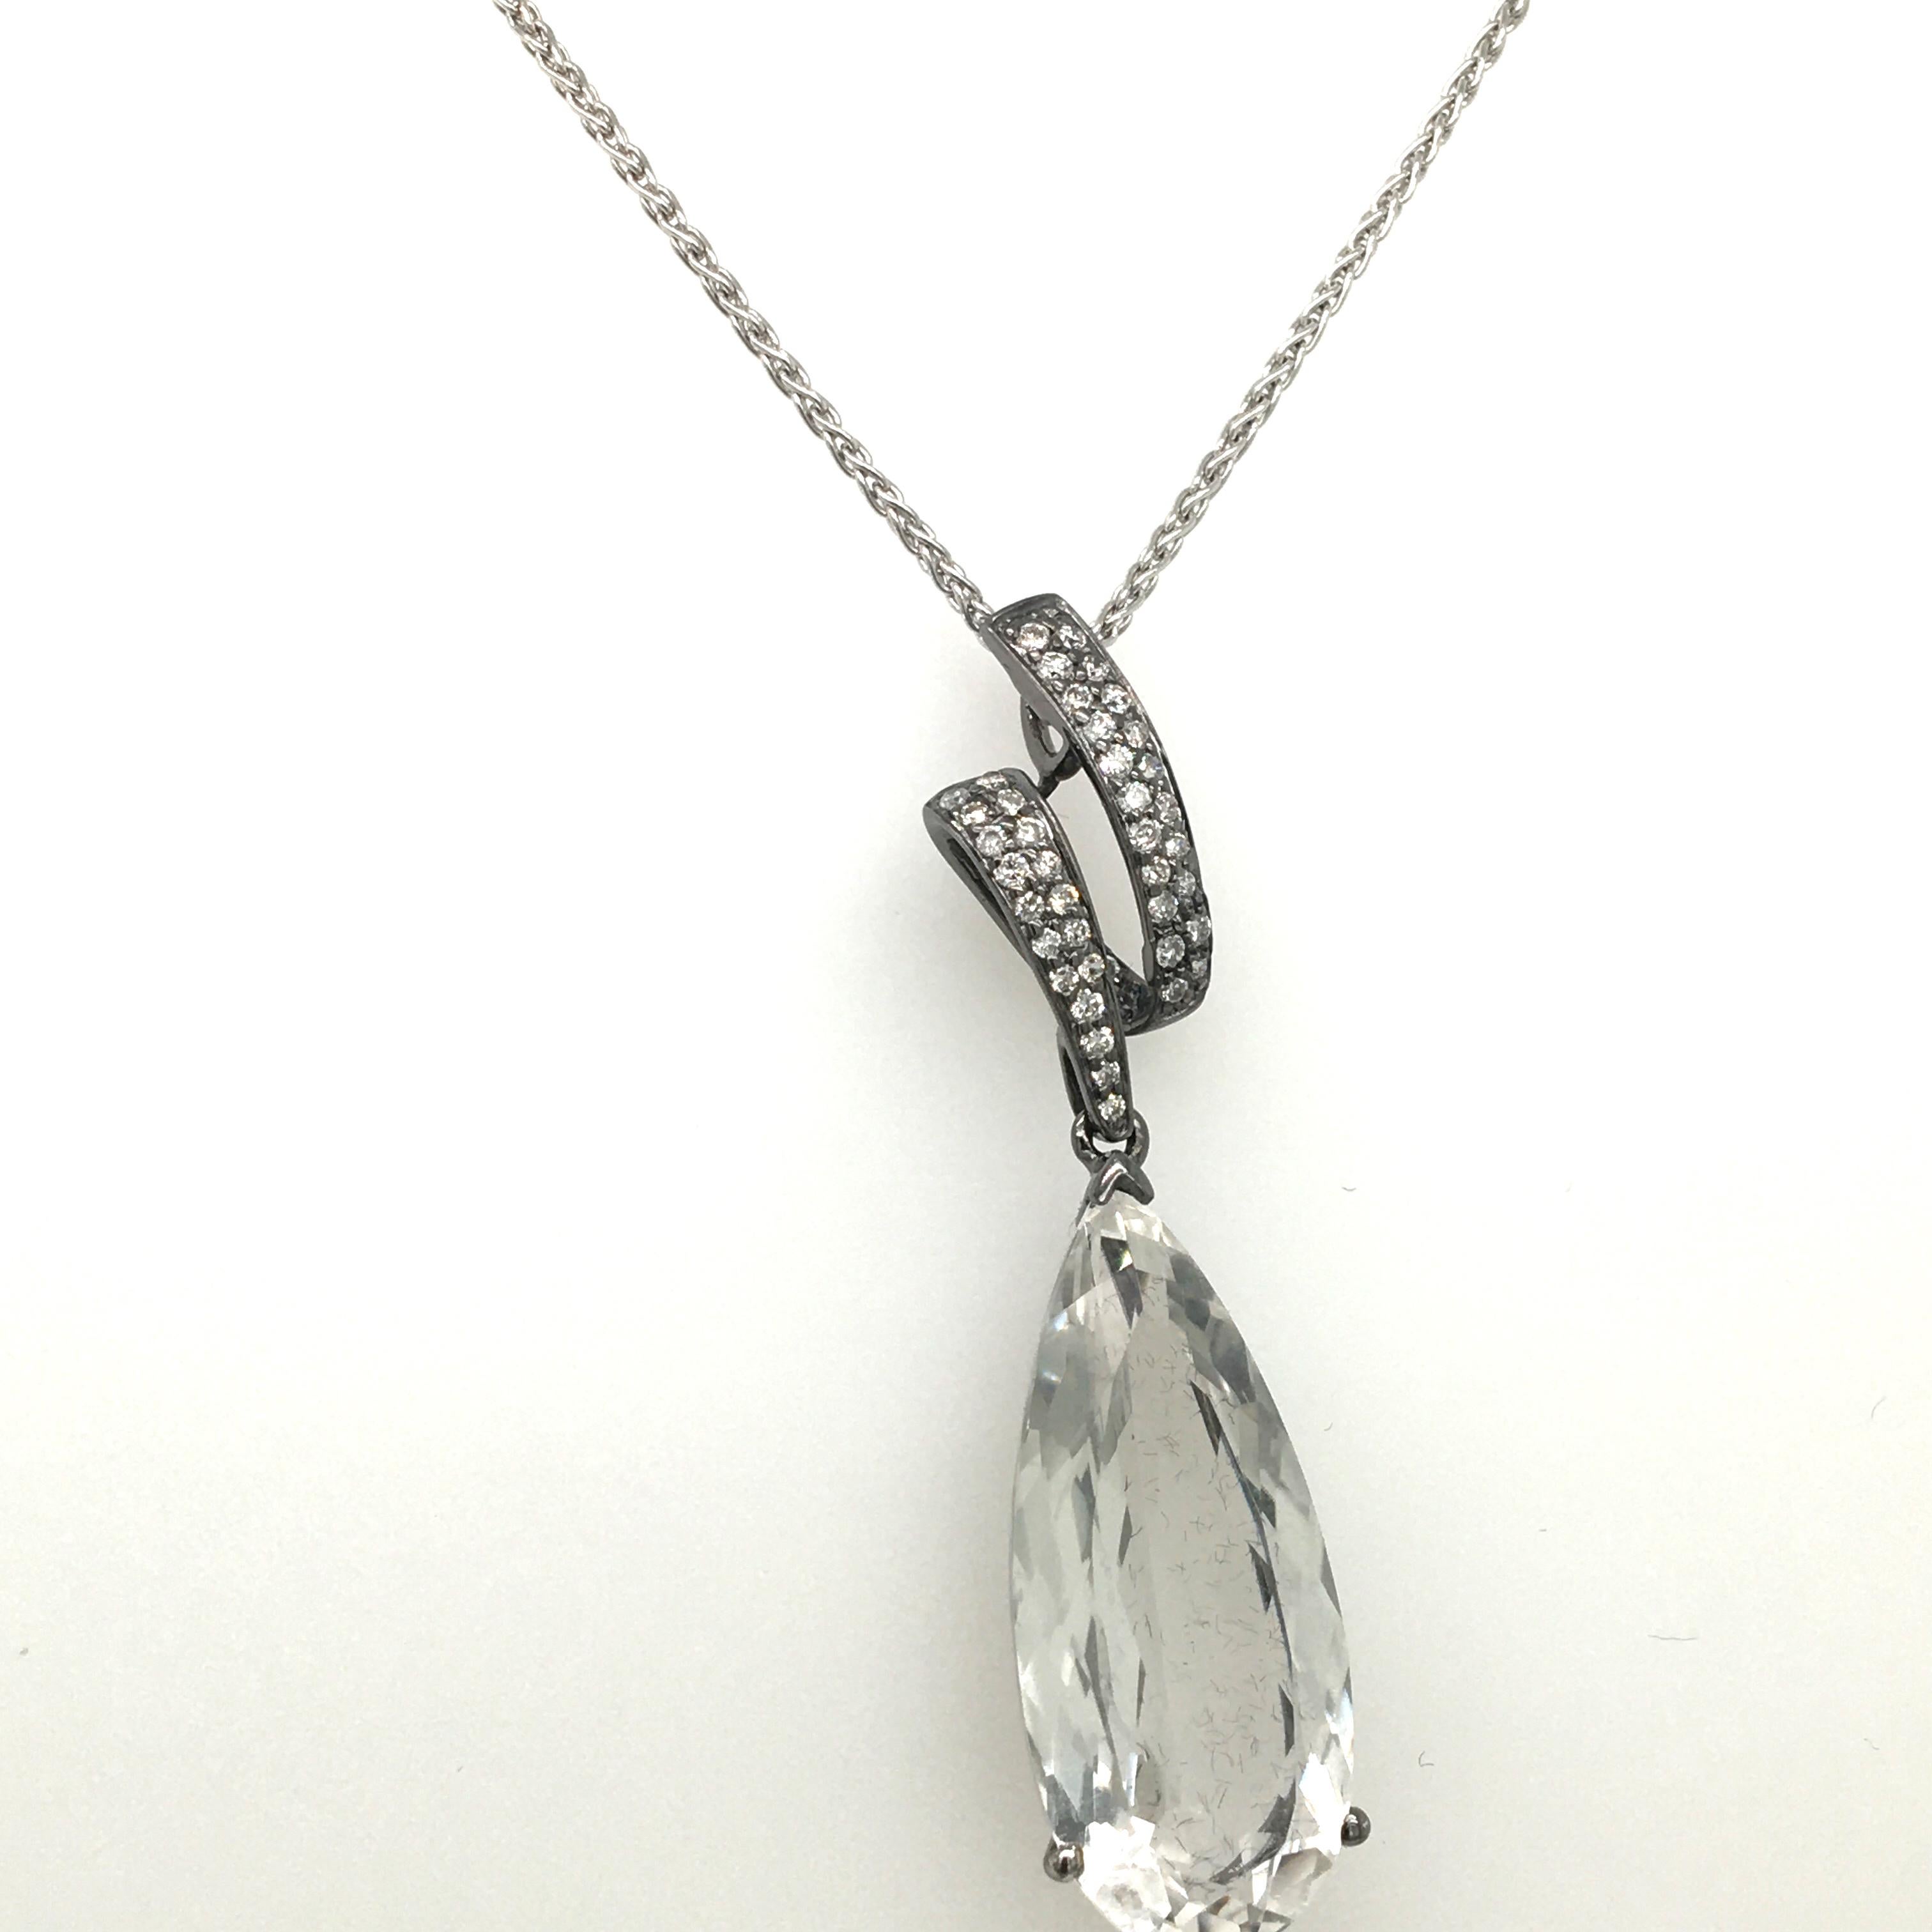 18 KT white gold pendent set with pave' diamonds 0.23 carats and a long faceted rock Crystal drop pear shape stone, chain 40 CM, total pendent length 49 CM made in Italy comes in a Box
